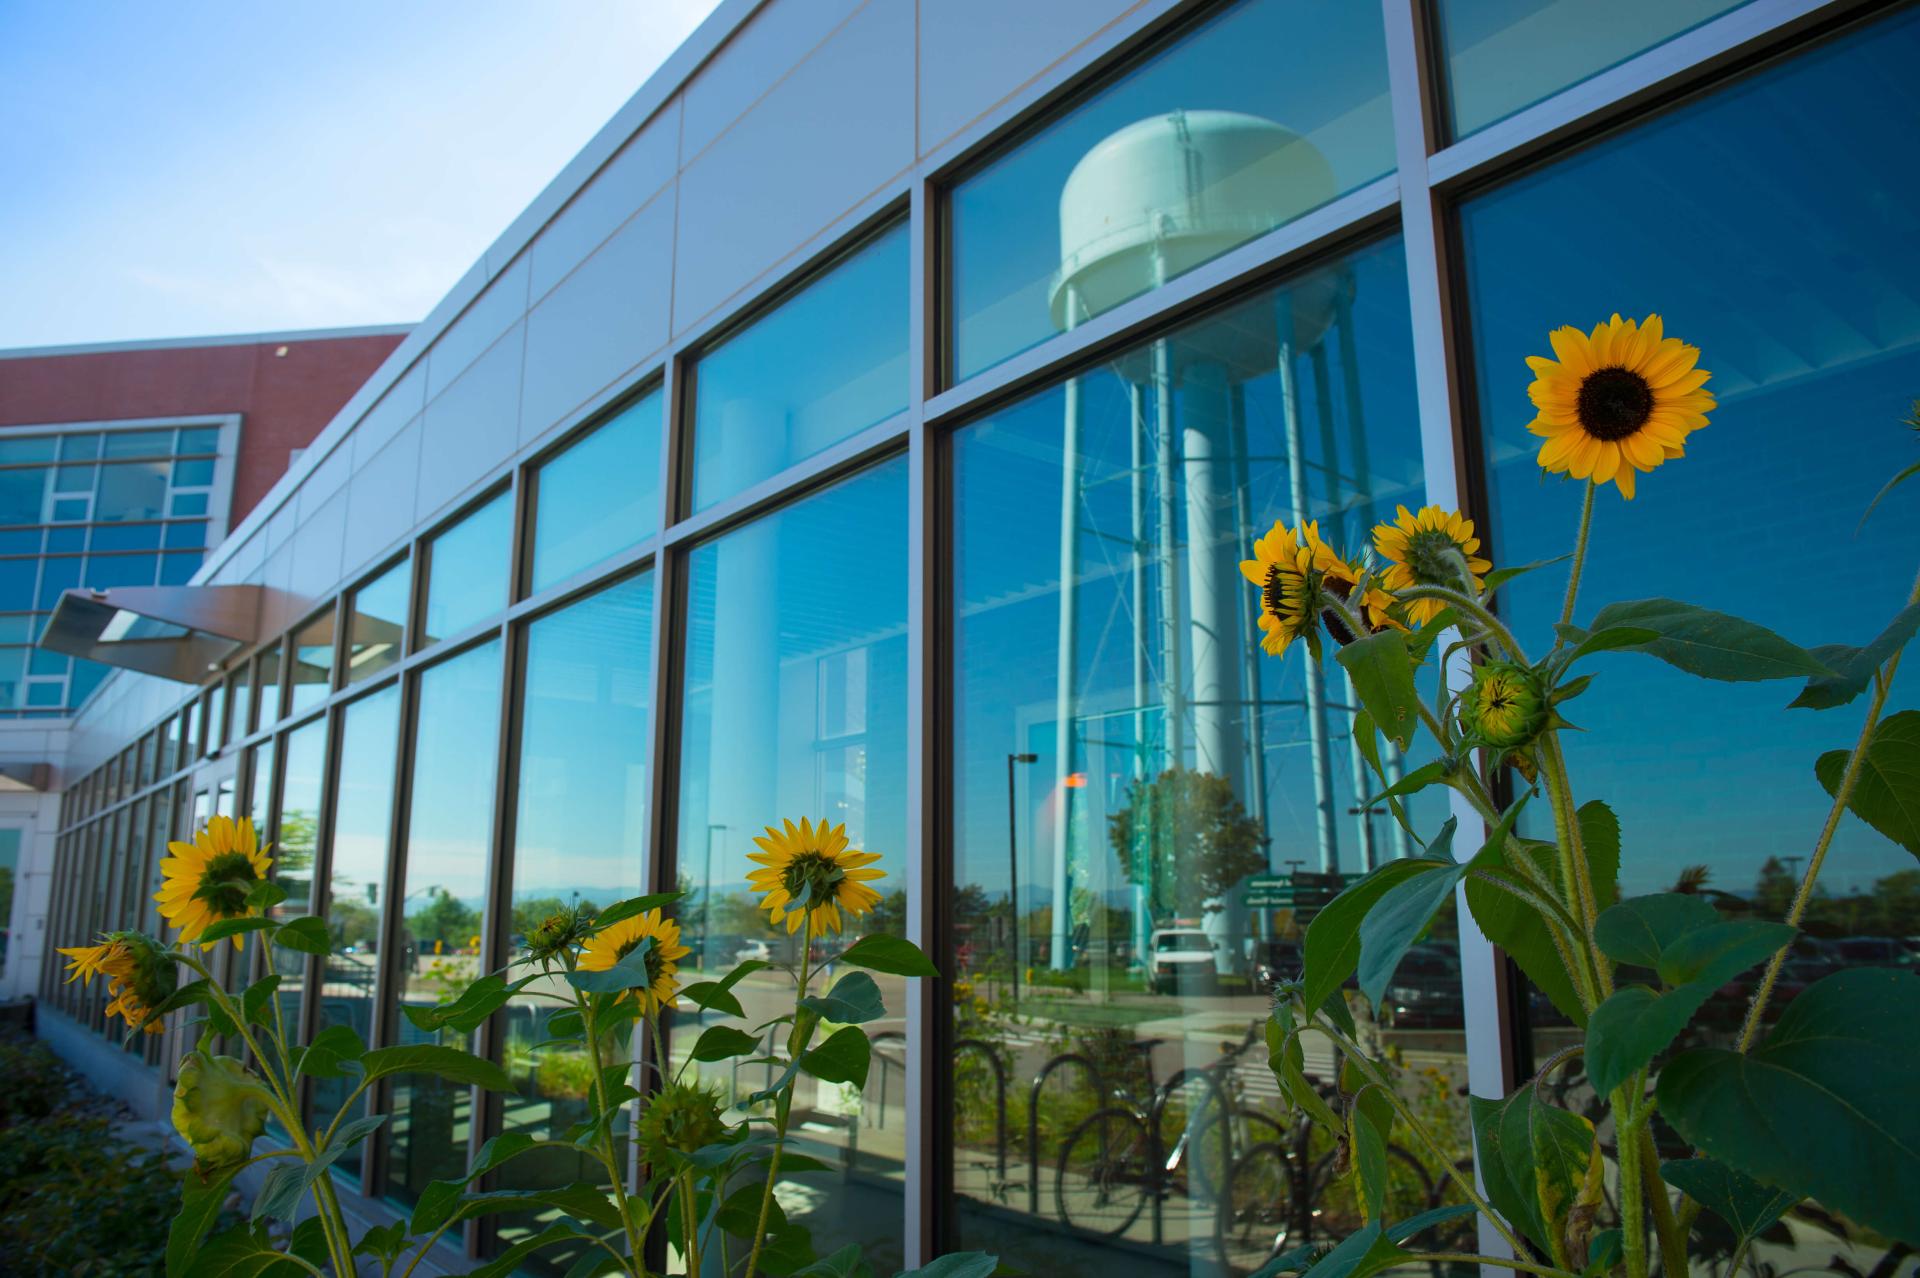 Beautiful sunflowers blooming outside of the Davis Center